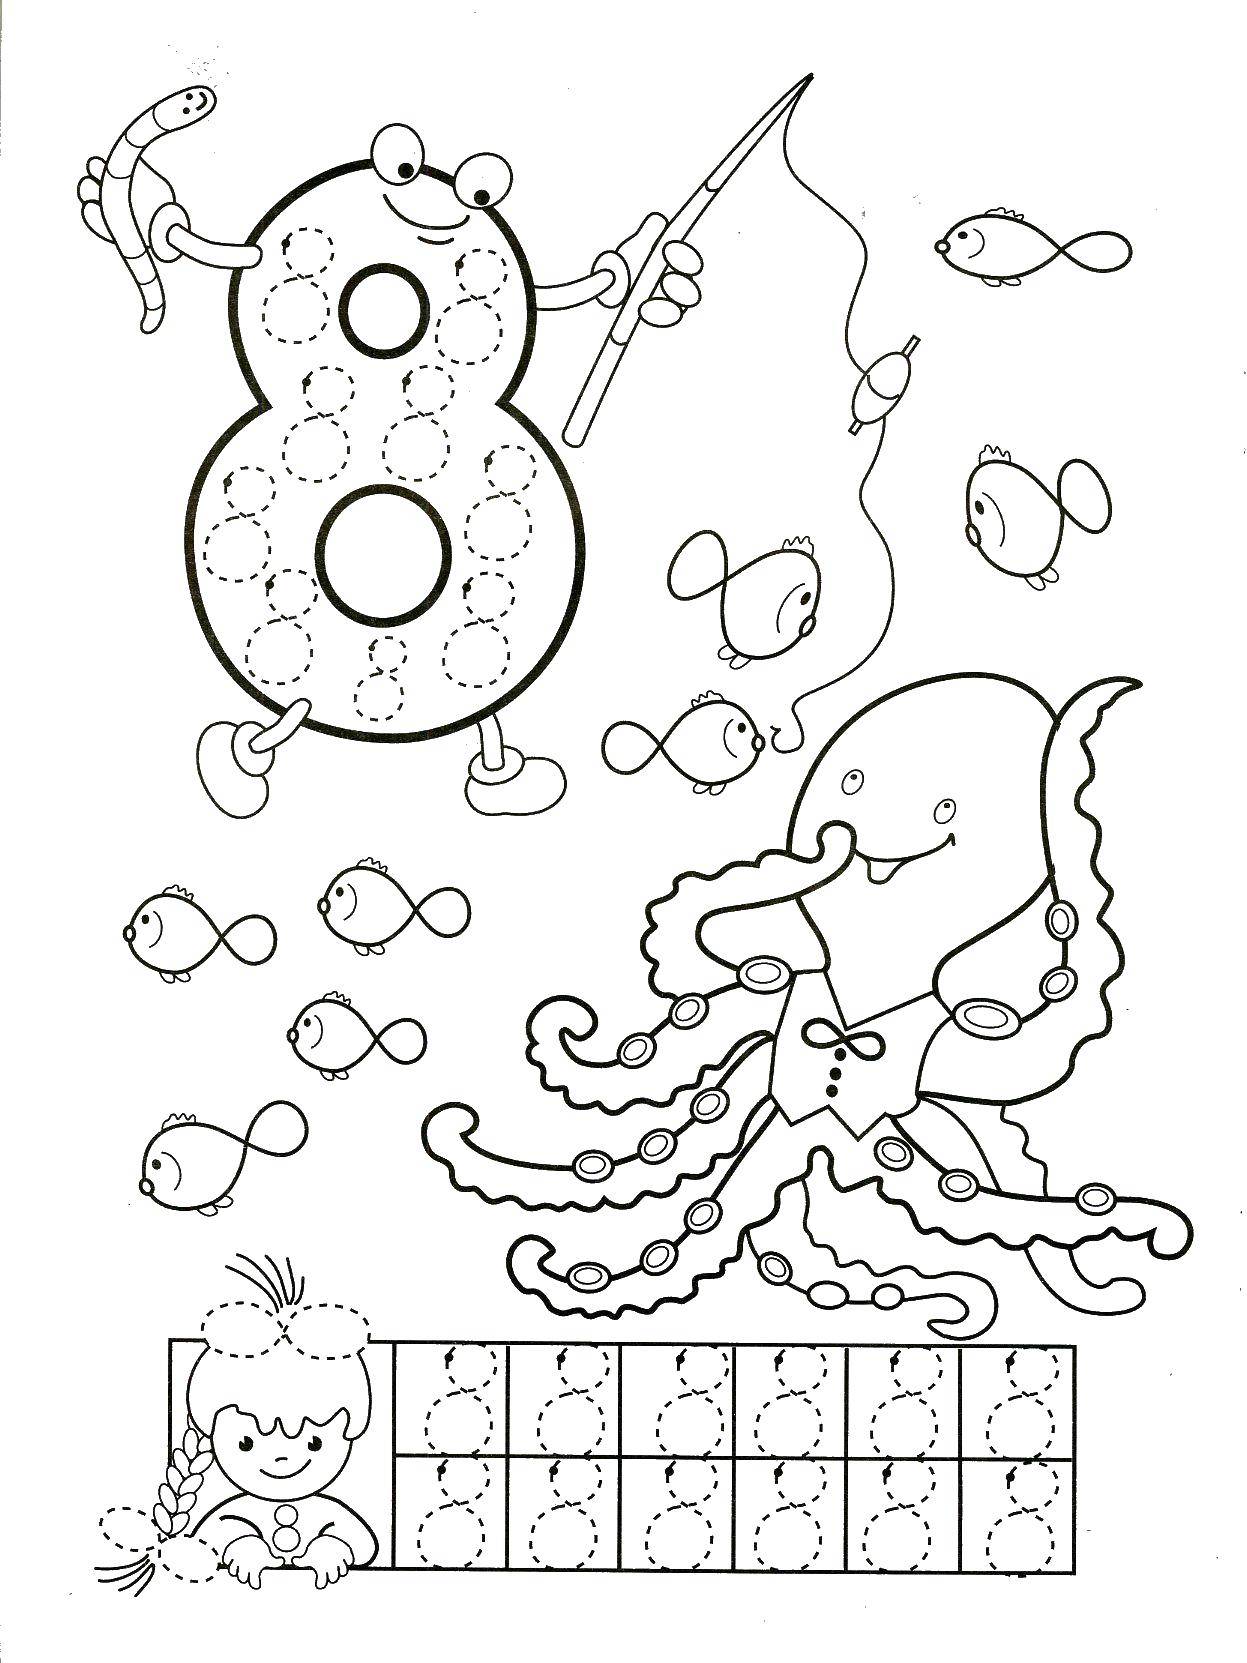 Coloring Octopus with 8 legs. Category tracing numbers. Tags:  octopus, recipe, 8.